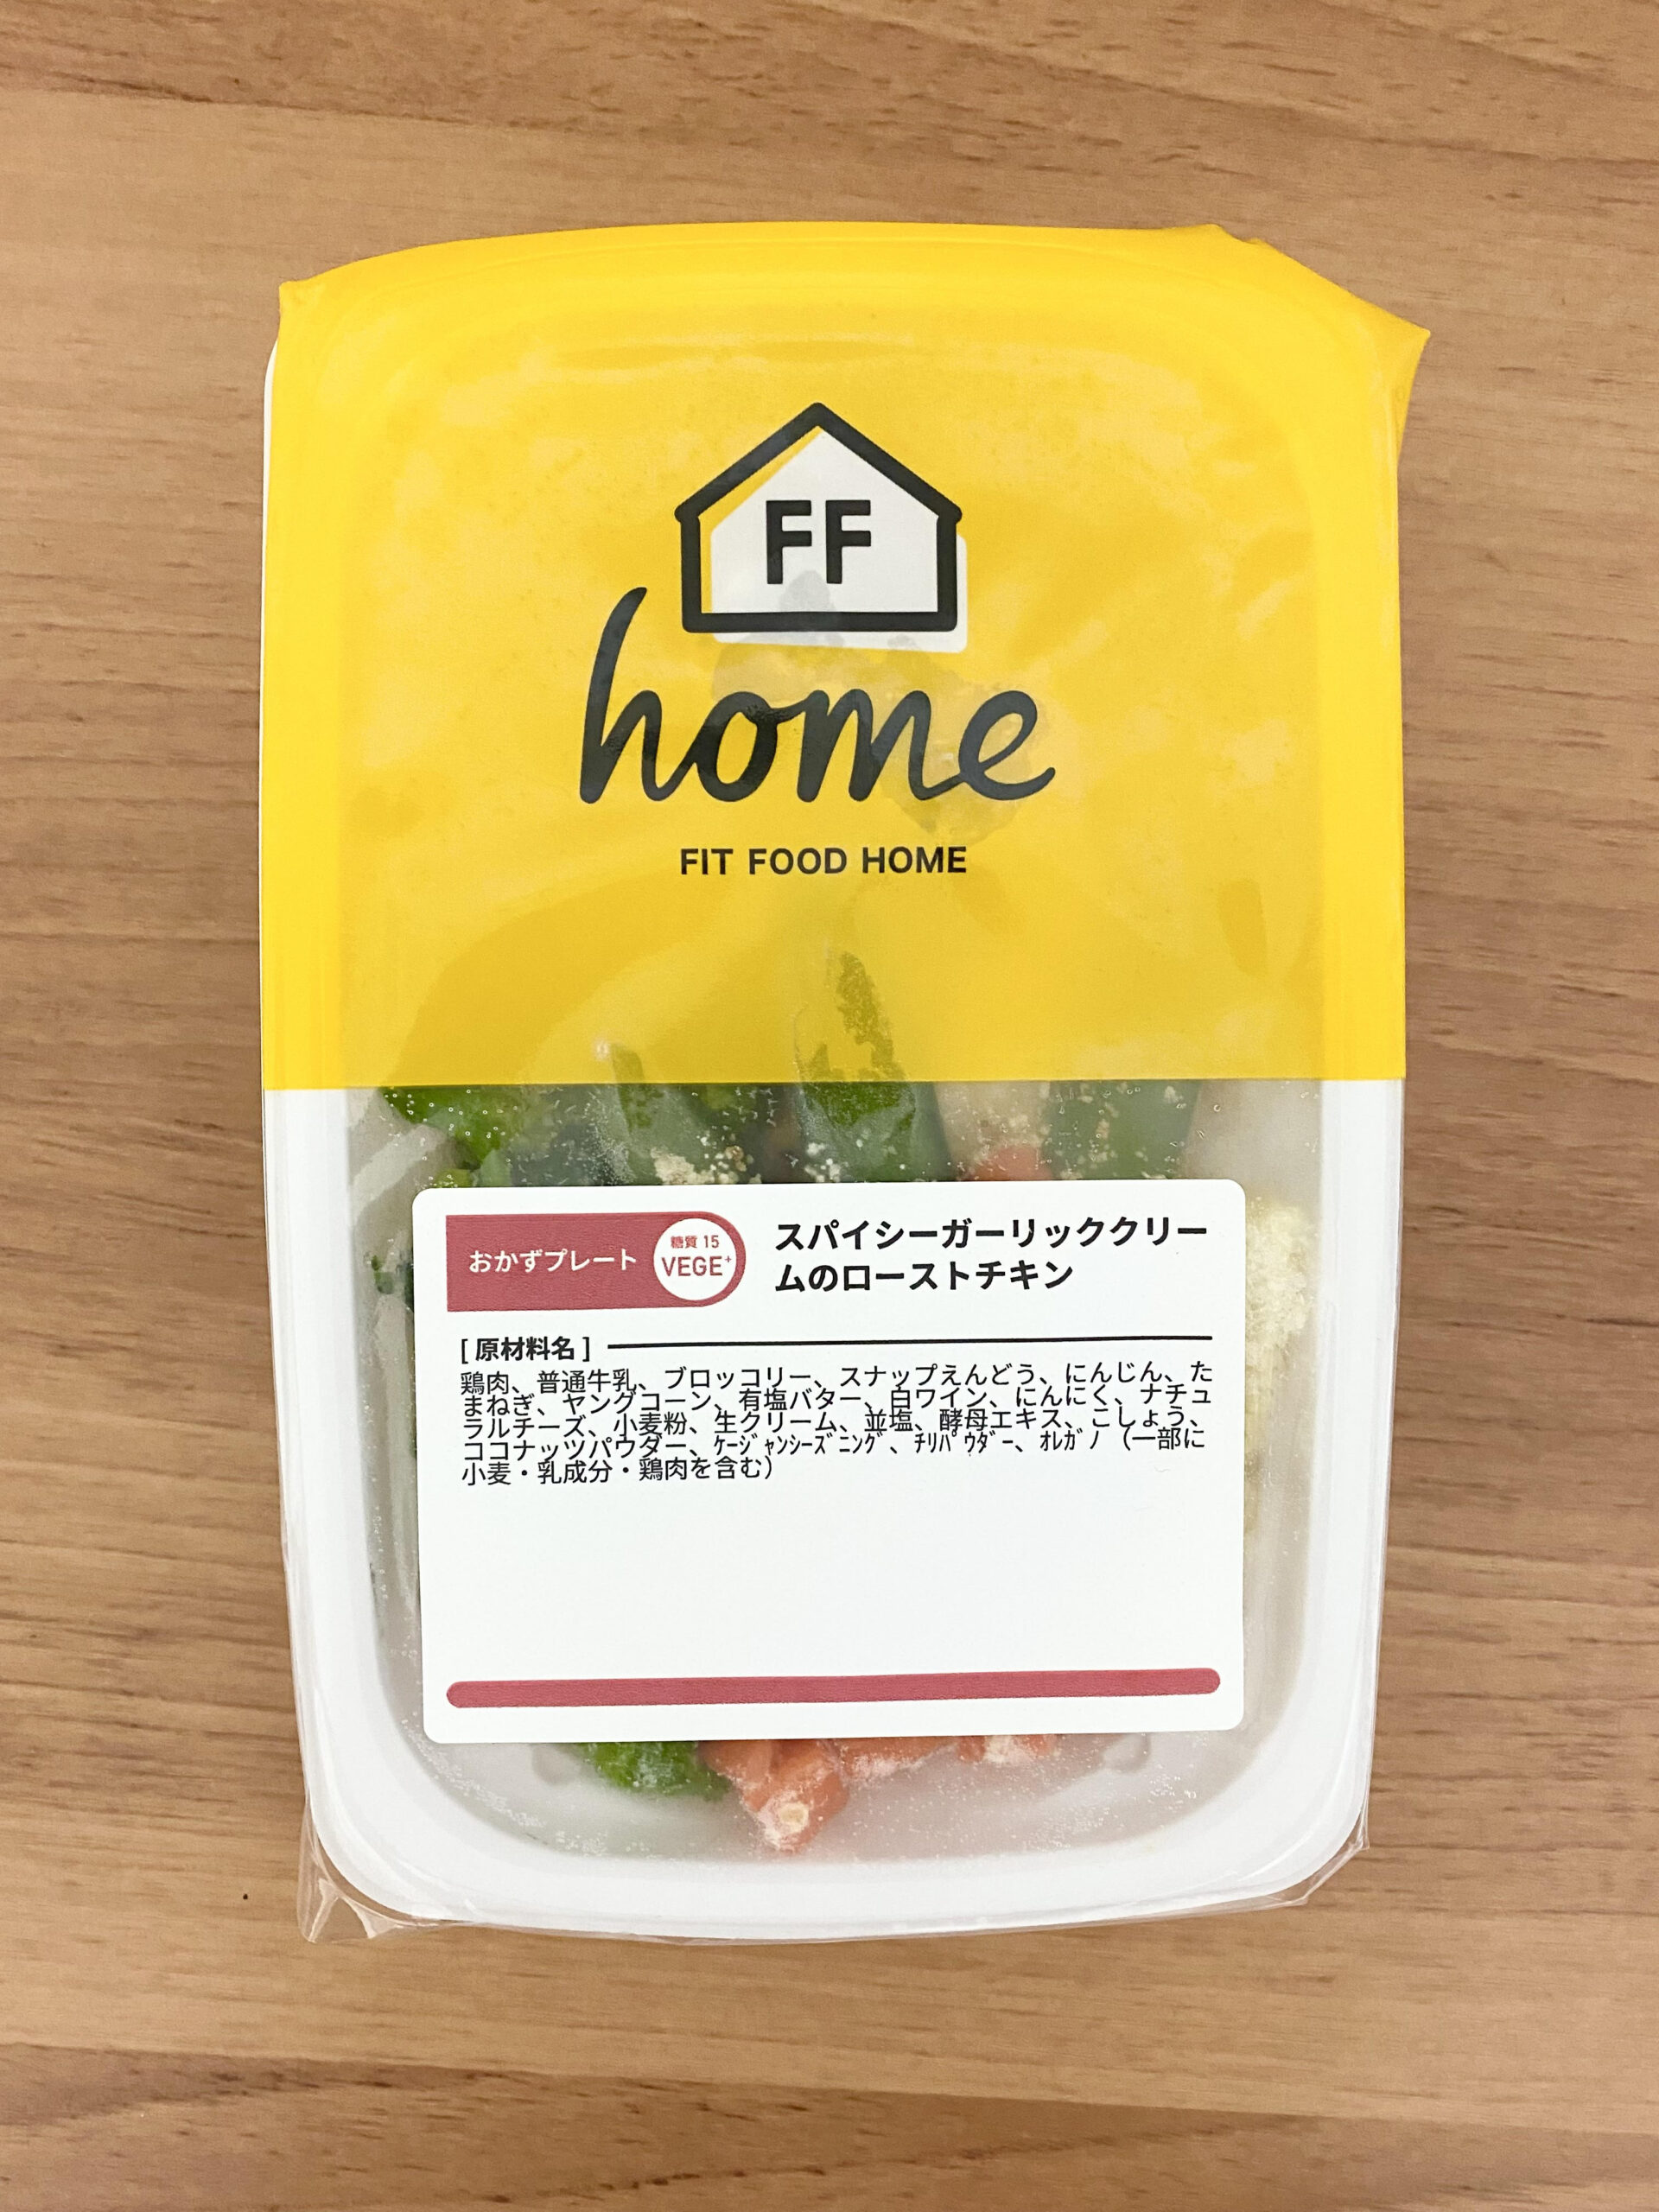 FIT FOOD HOME_低糖質VEGE＋_スパイシーガーリッククリームのローストチキン_原材料名